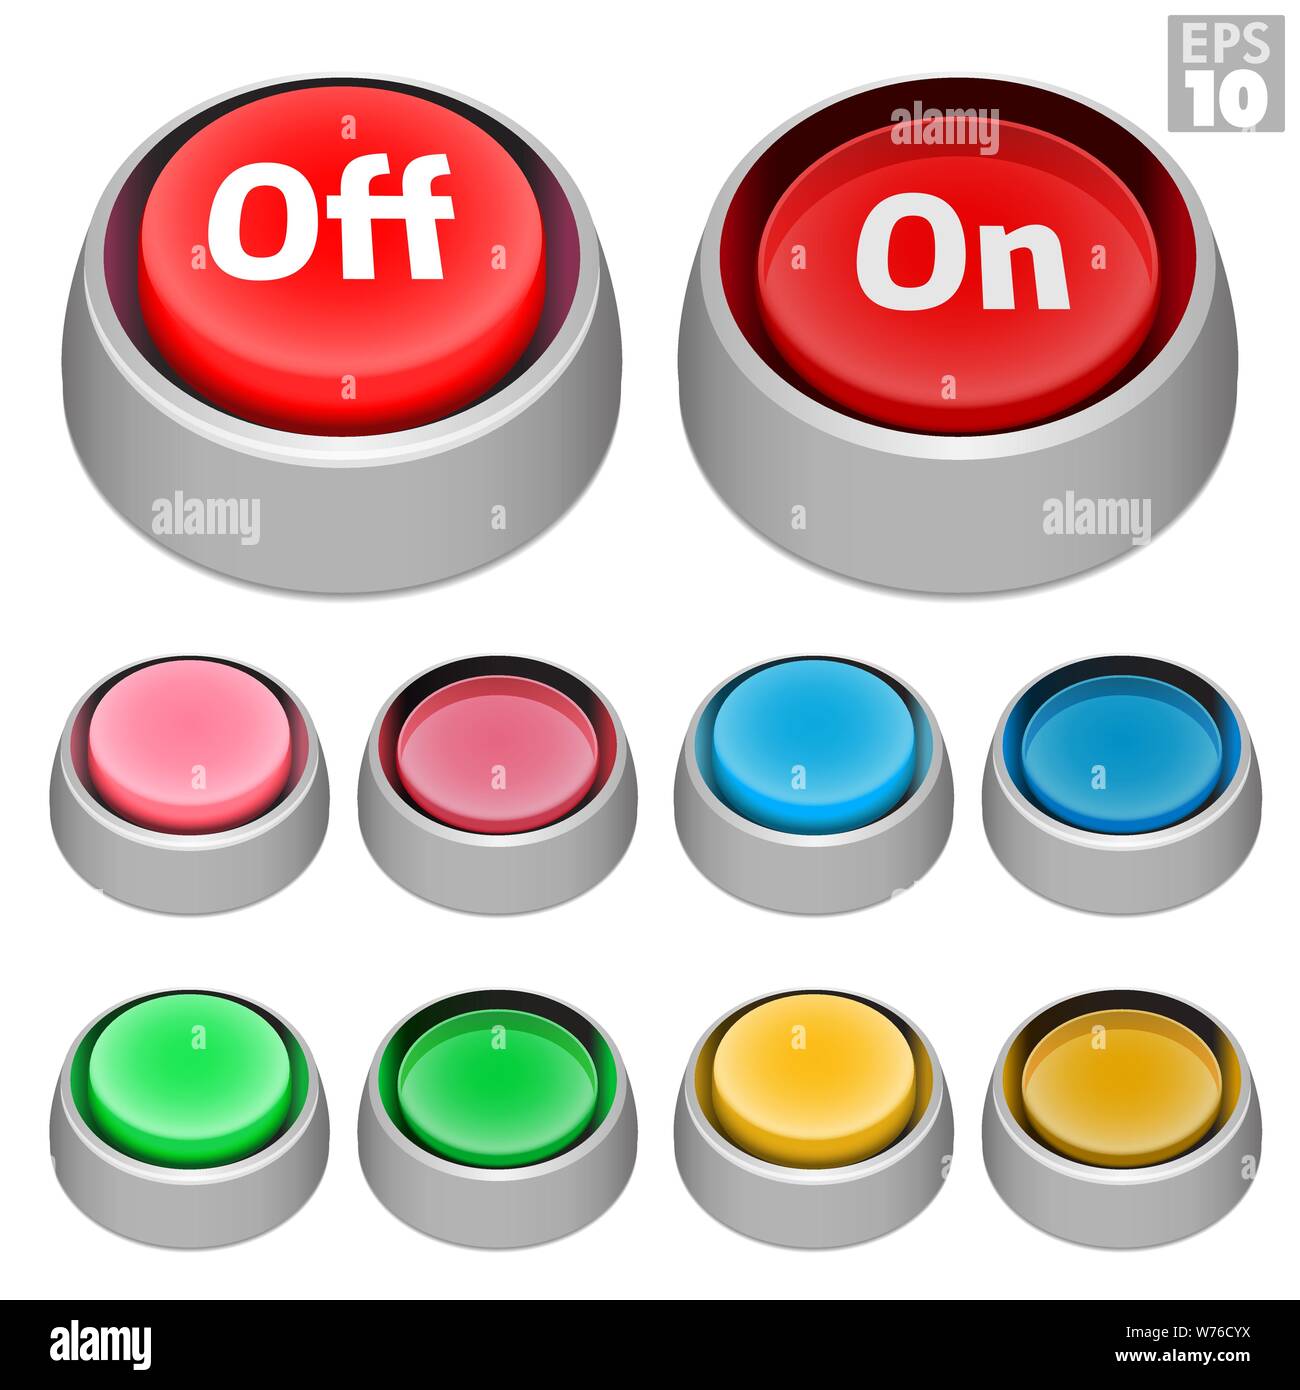 Push buttons with on off state and aluminum style mounting bezel, pressed and unpressed in various retro arcade colors. Stock Vector